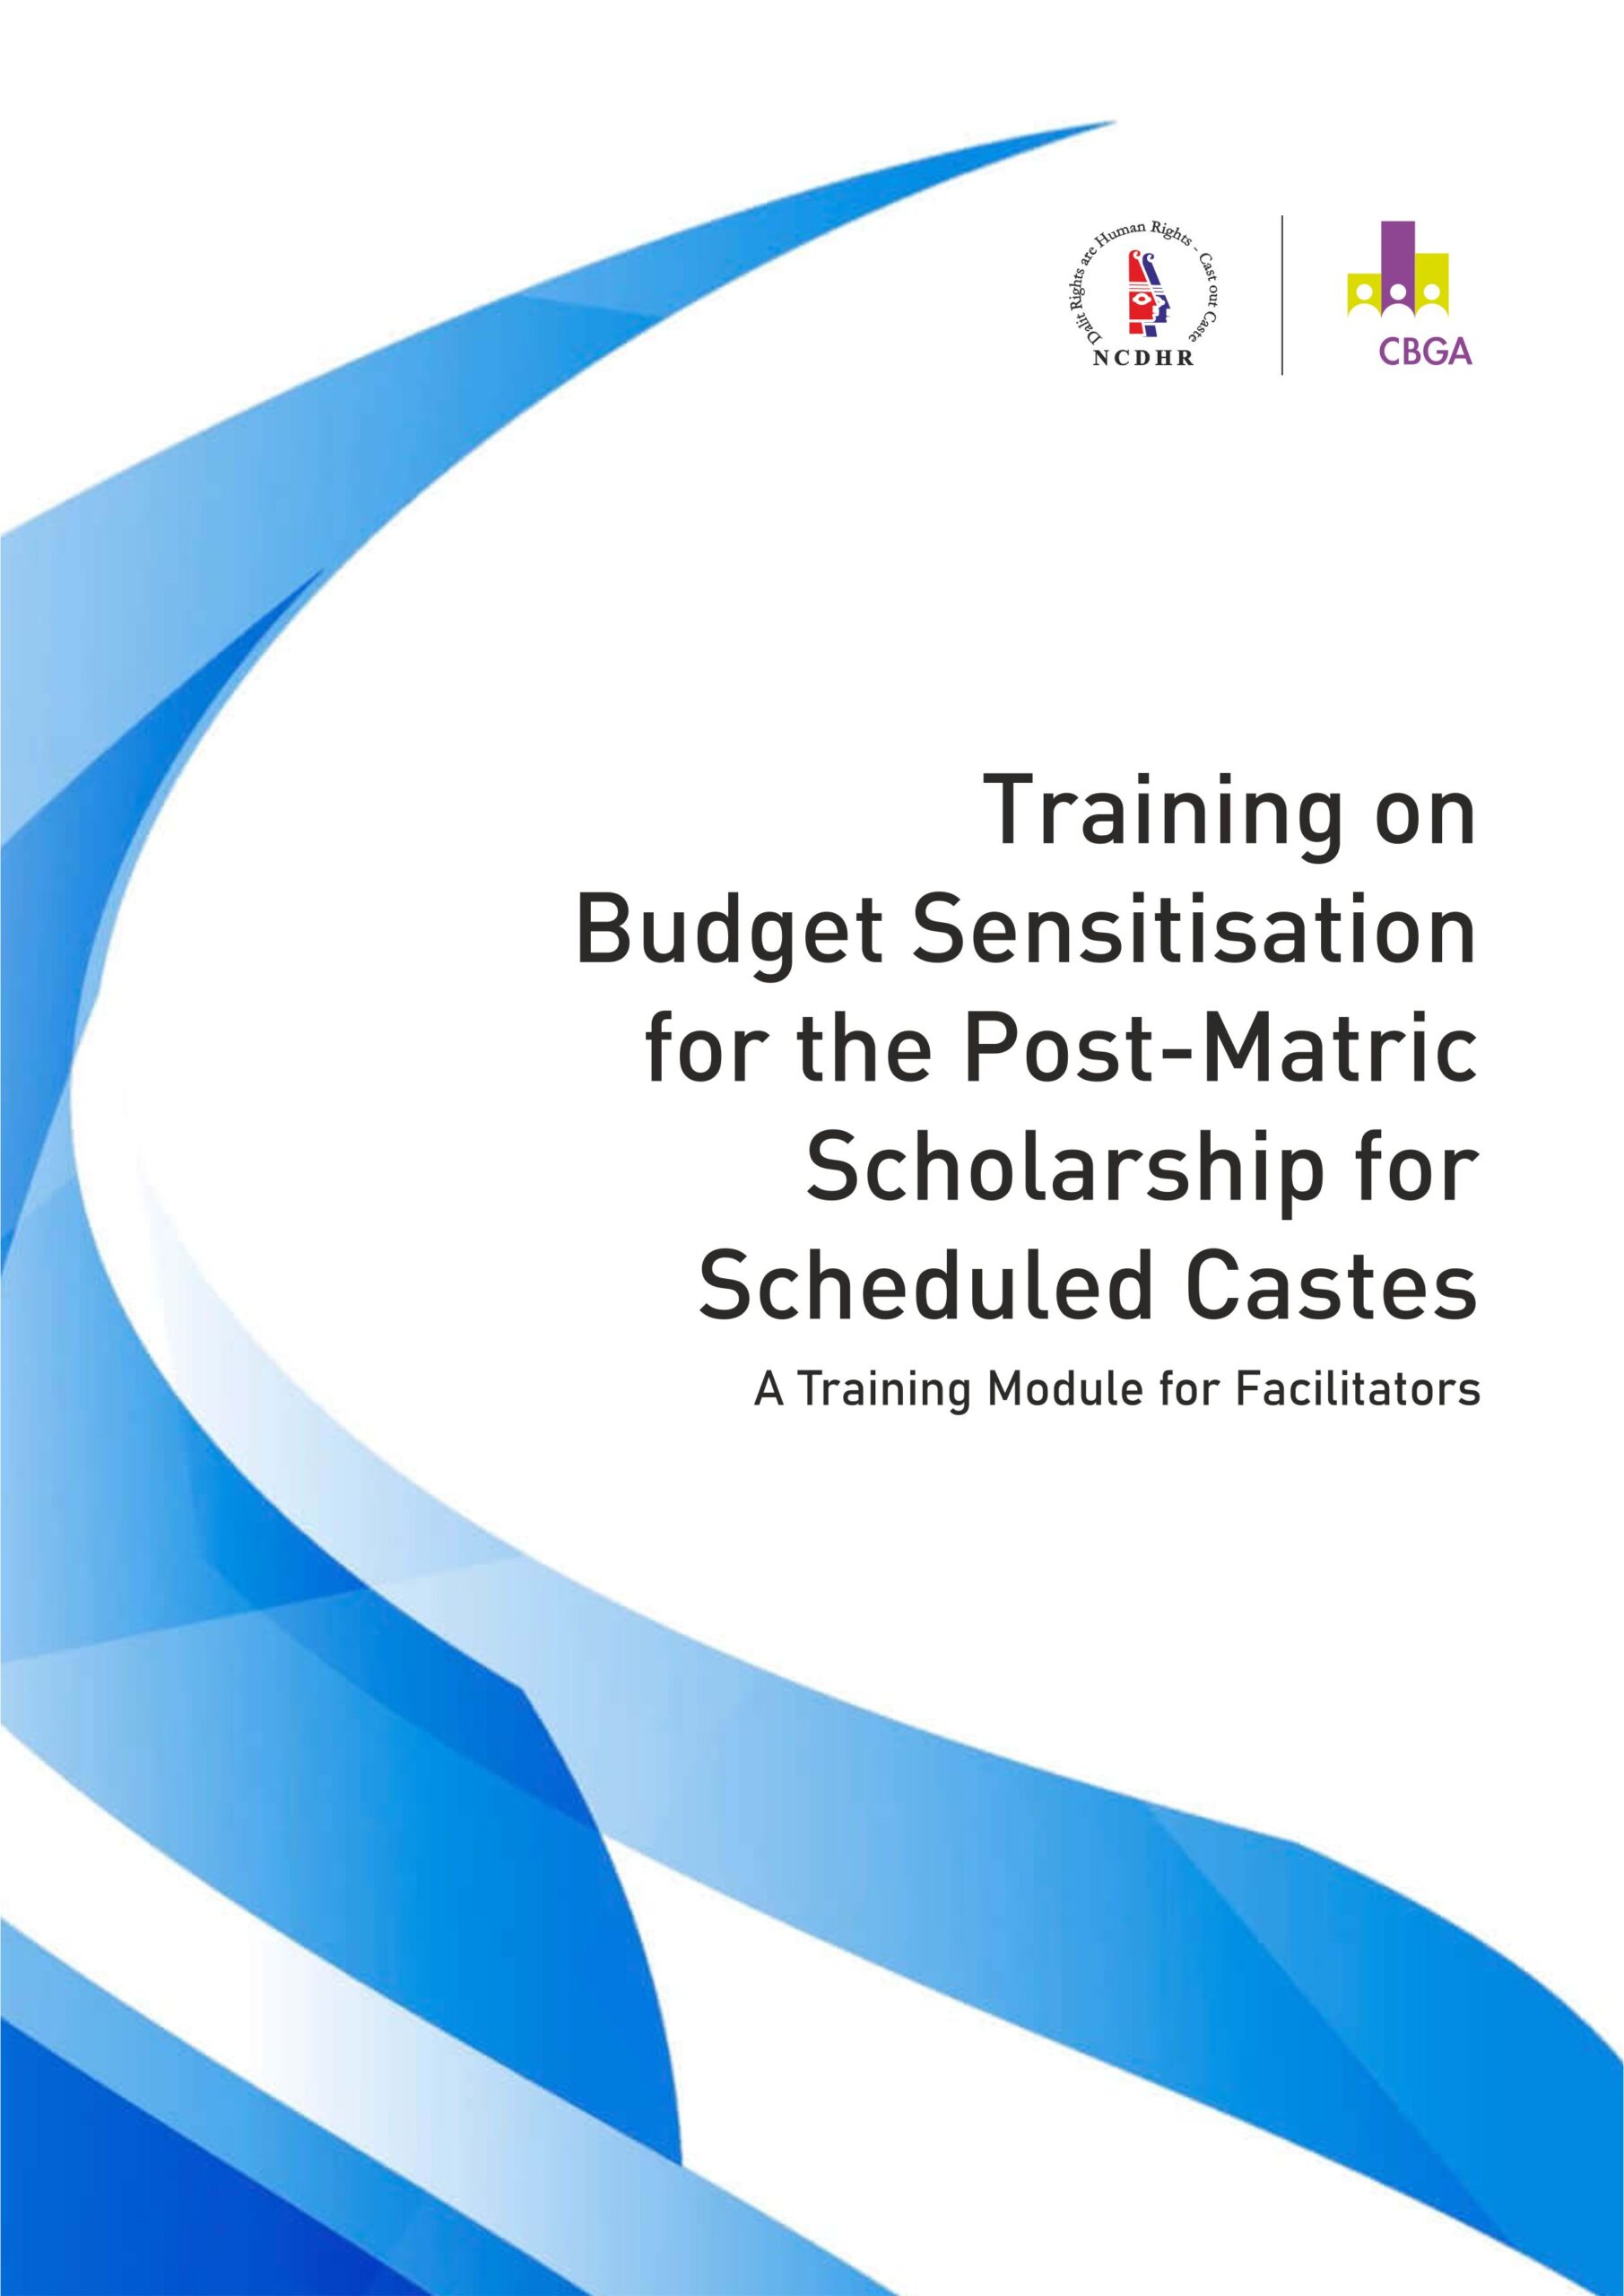 Training on Budget Sensitisation for the Post-Matric Scholarship for Scheduled Castes